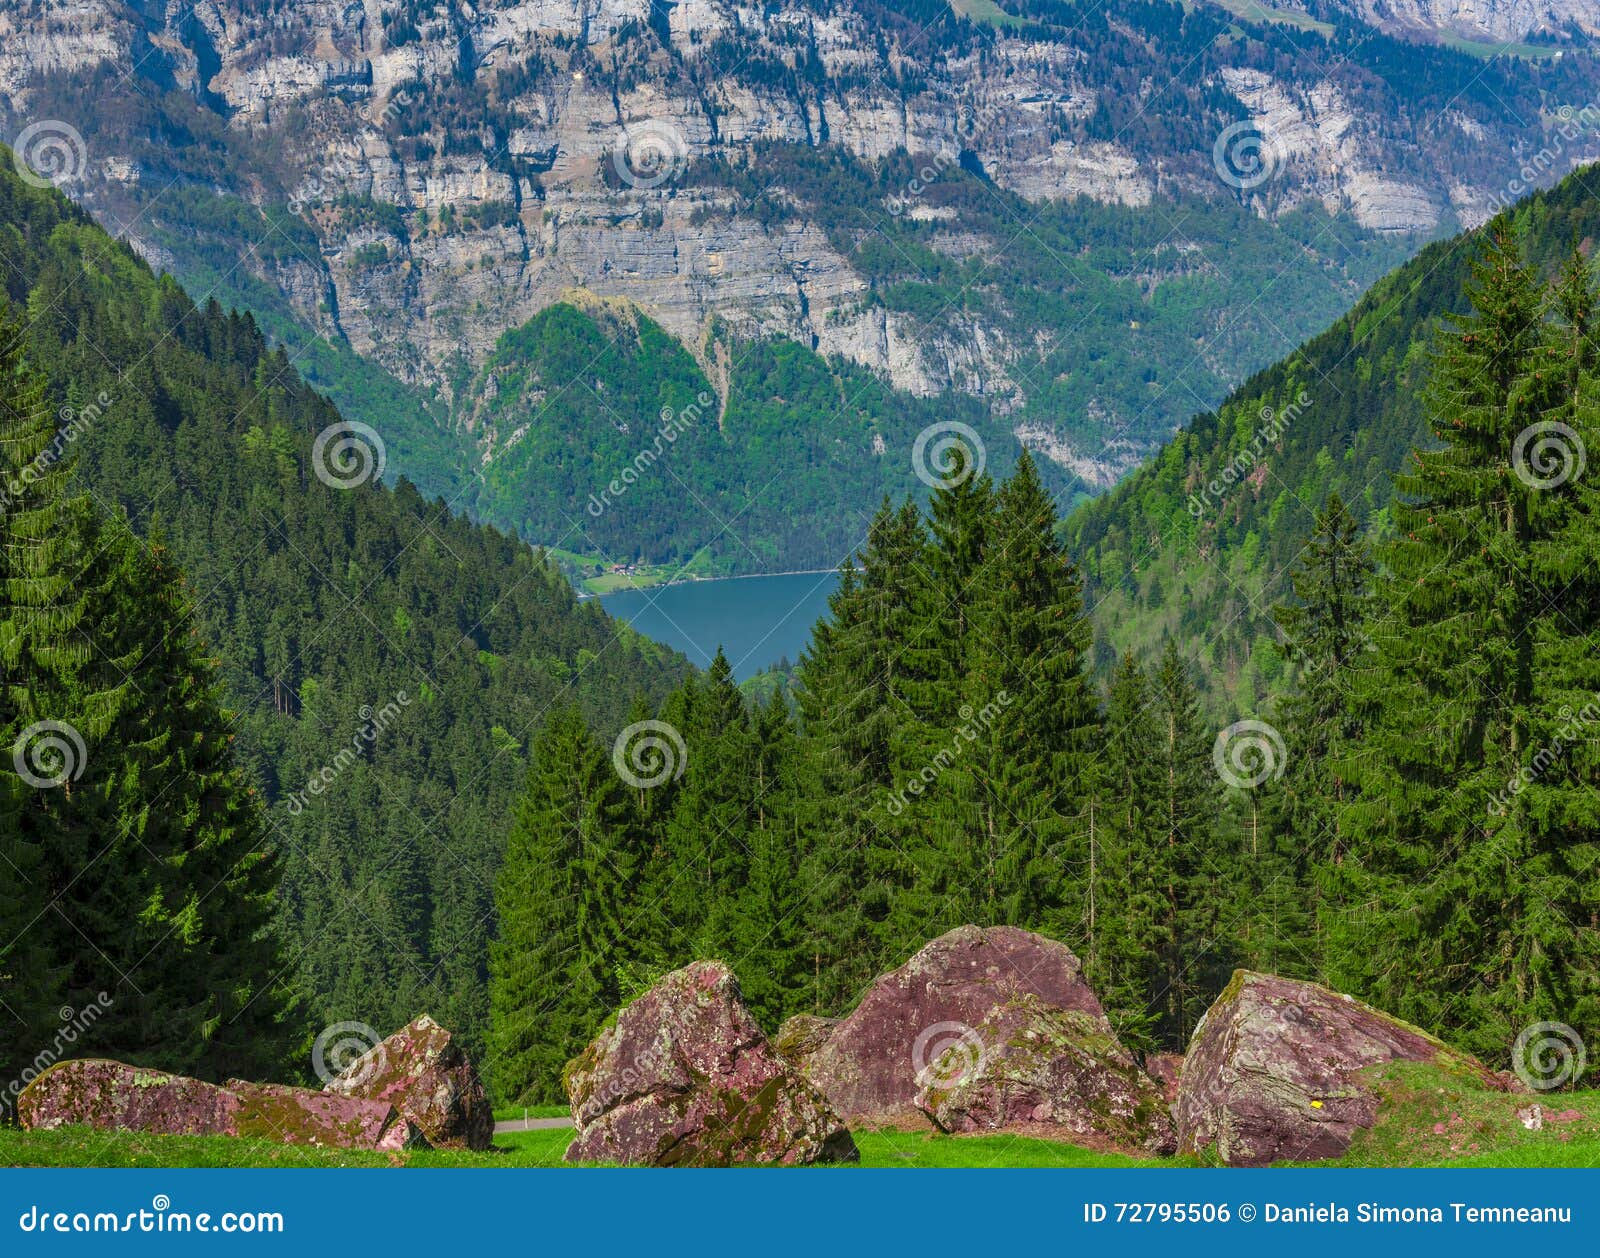 Mountain Rocks With Forest In The Background Stock Photo Image